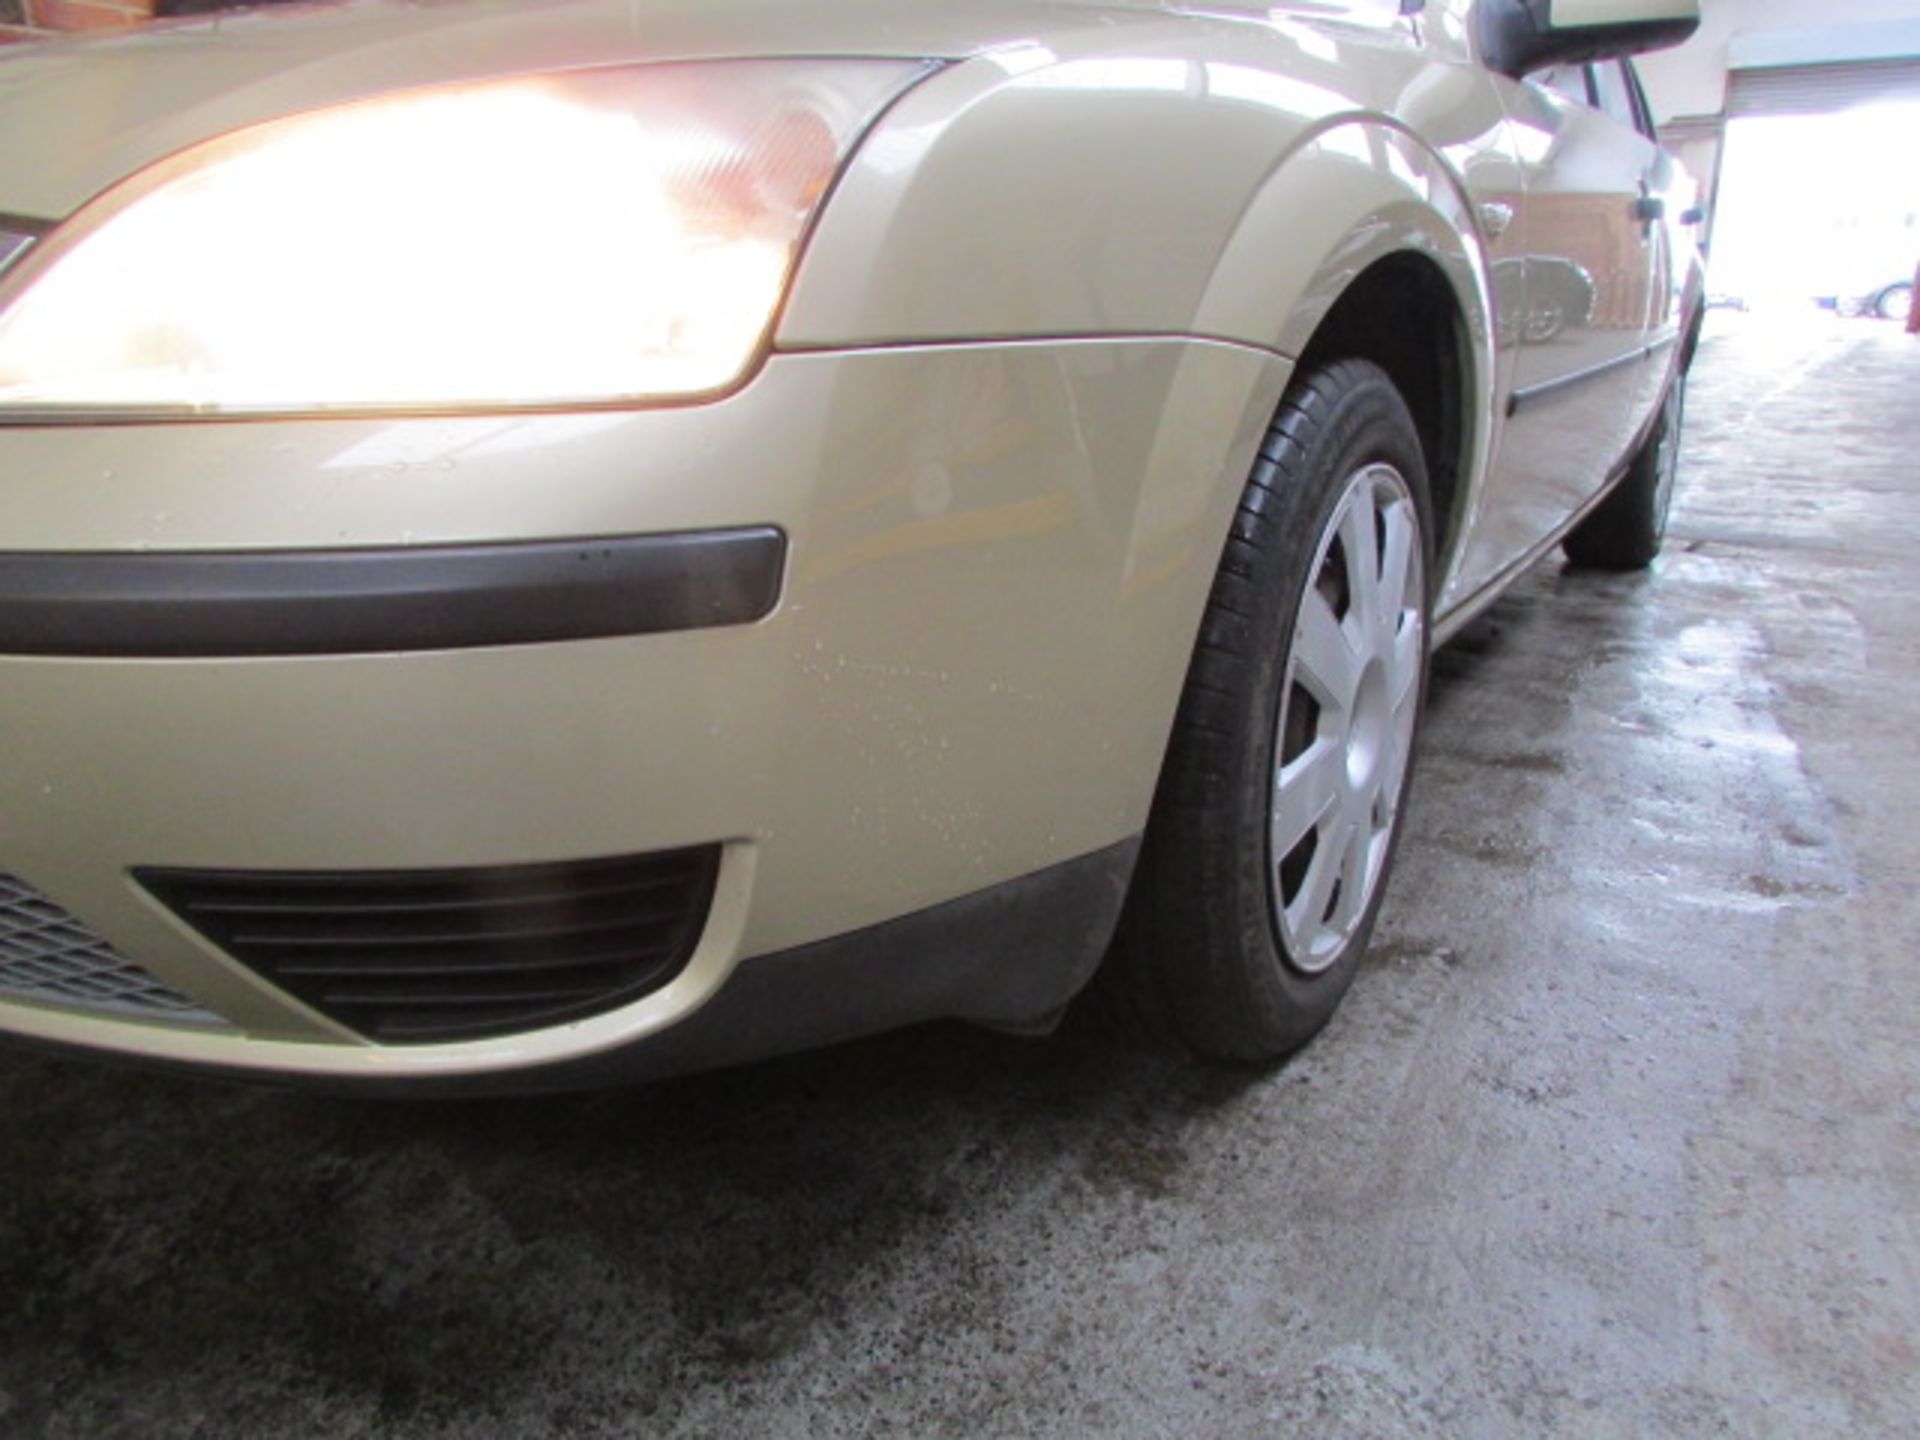 56 06 Ford Mondeo LX TDCi 130 - Image 7 of 11